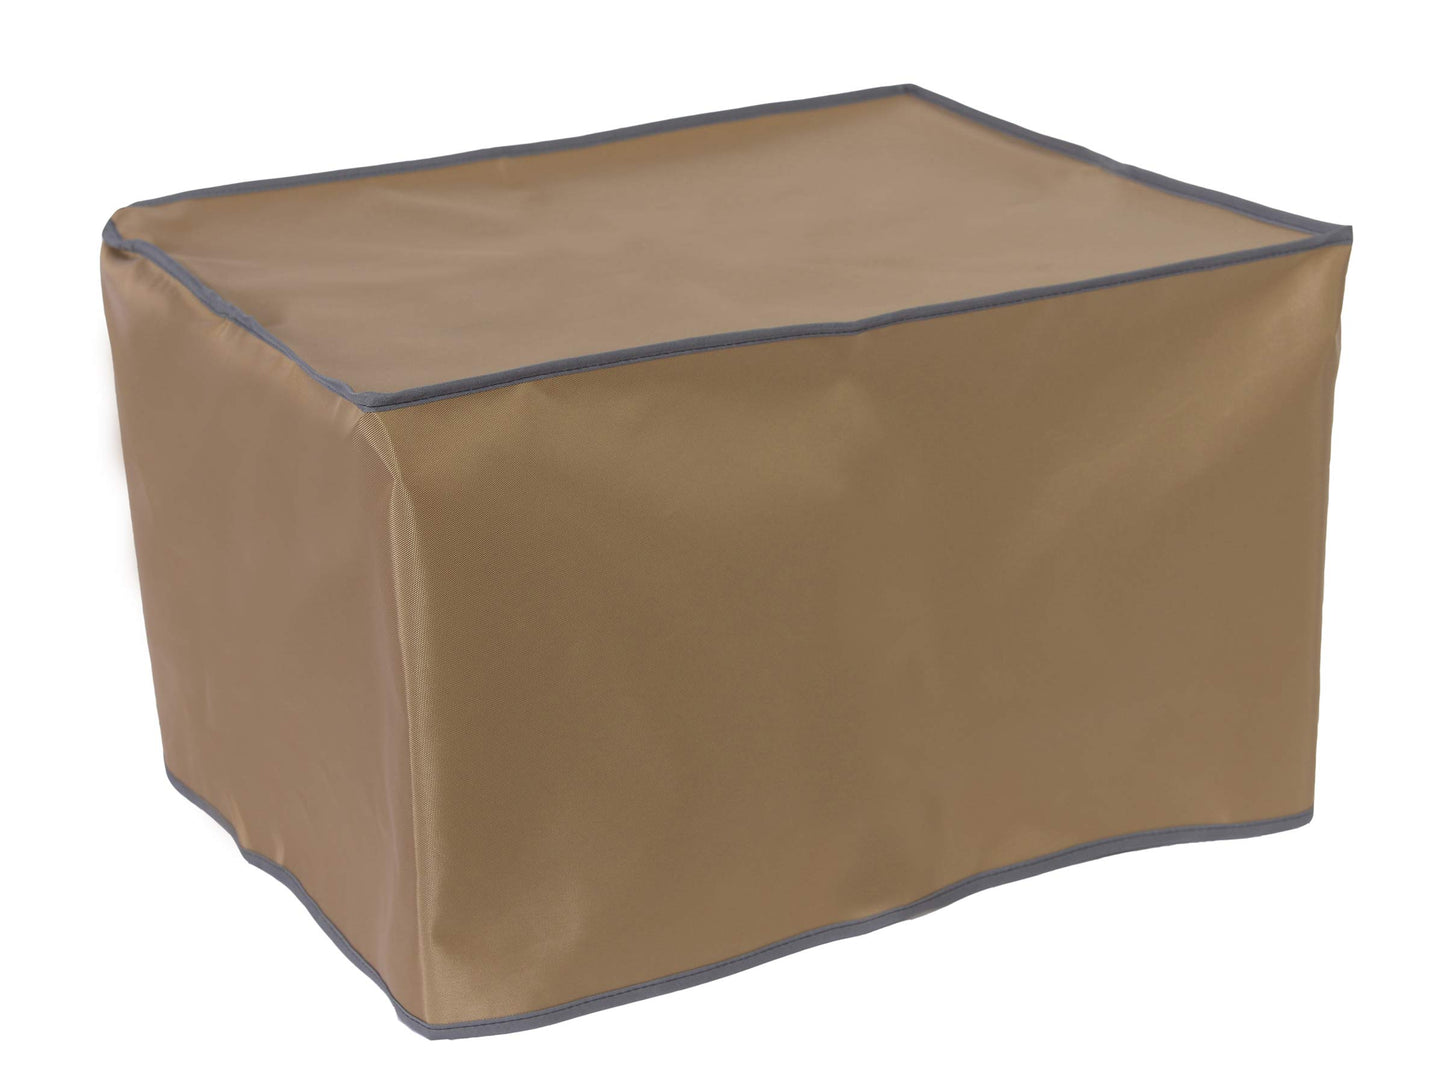 The Perfect Dust Cover, Tan Nylon Cover for HP DesignJet T1600 36-in Postscript Large Format Printer, Anti Static Waterproof Cover, Dimensions 55''W x 30''D x 43.7''H by The Perfect Dust Cover LLC